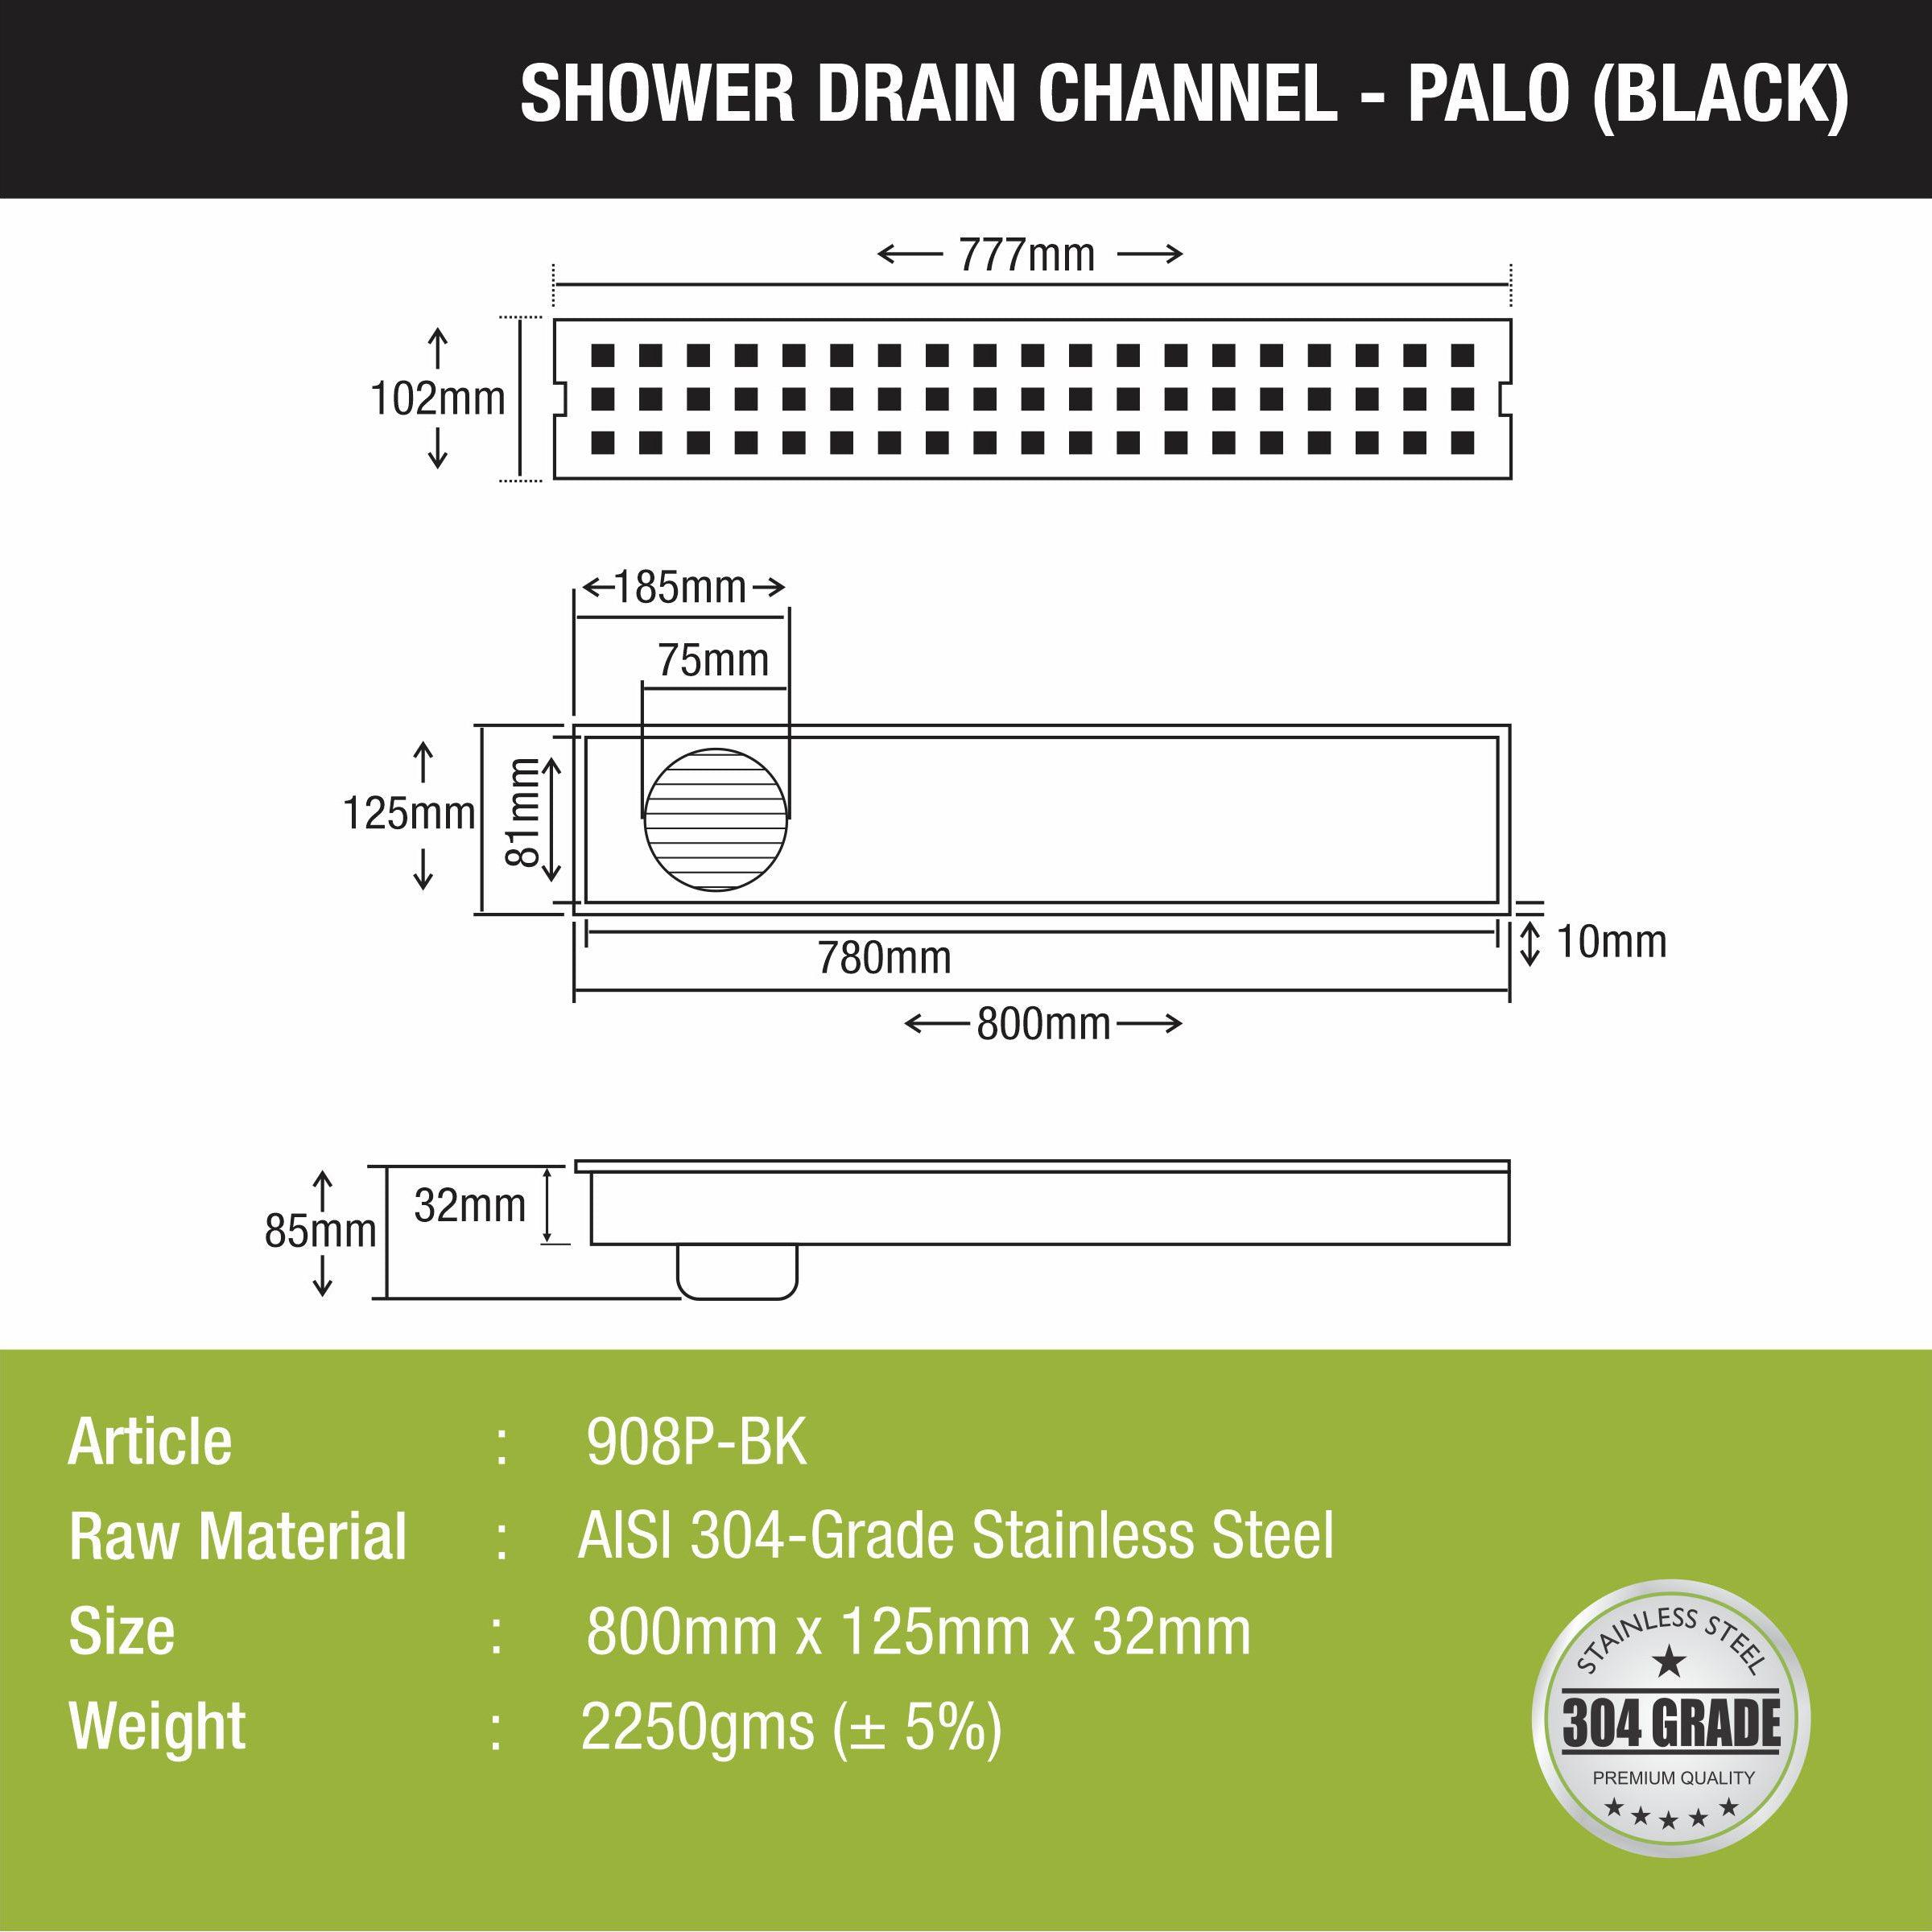 Palo Shower Drain Channel - Black (32 x 5 Inches) size and measurement